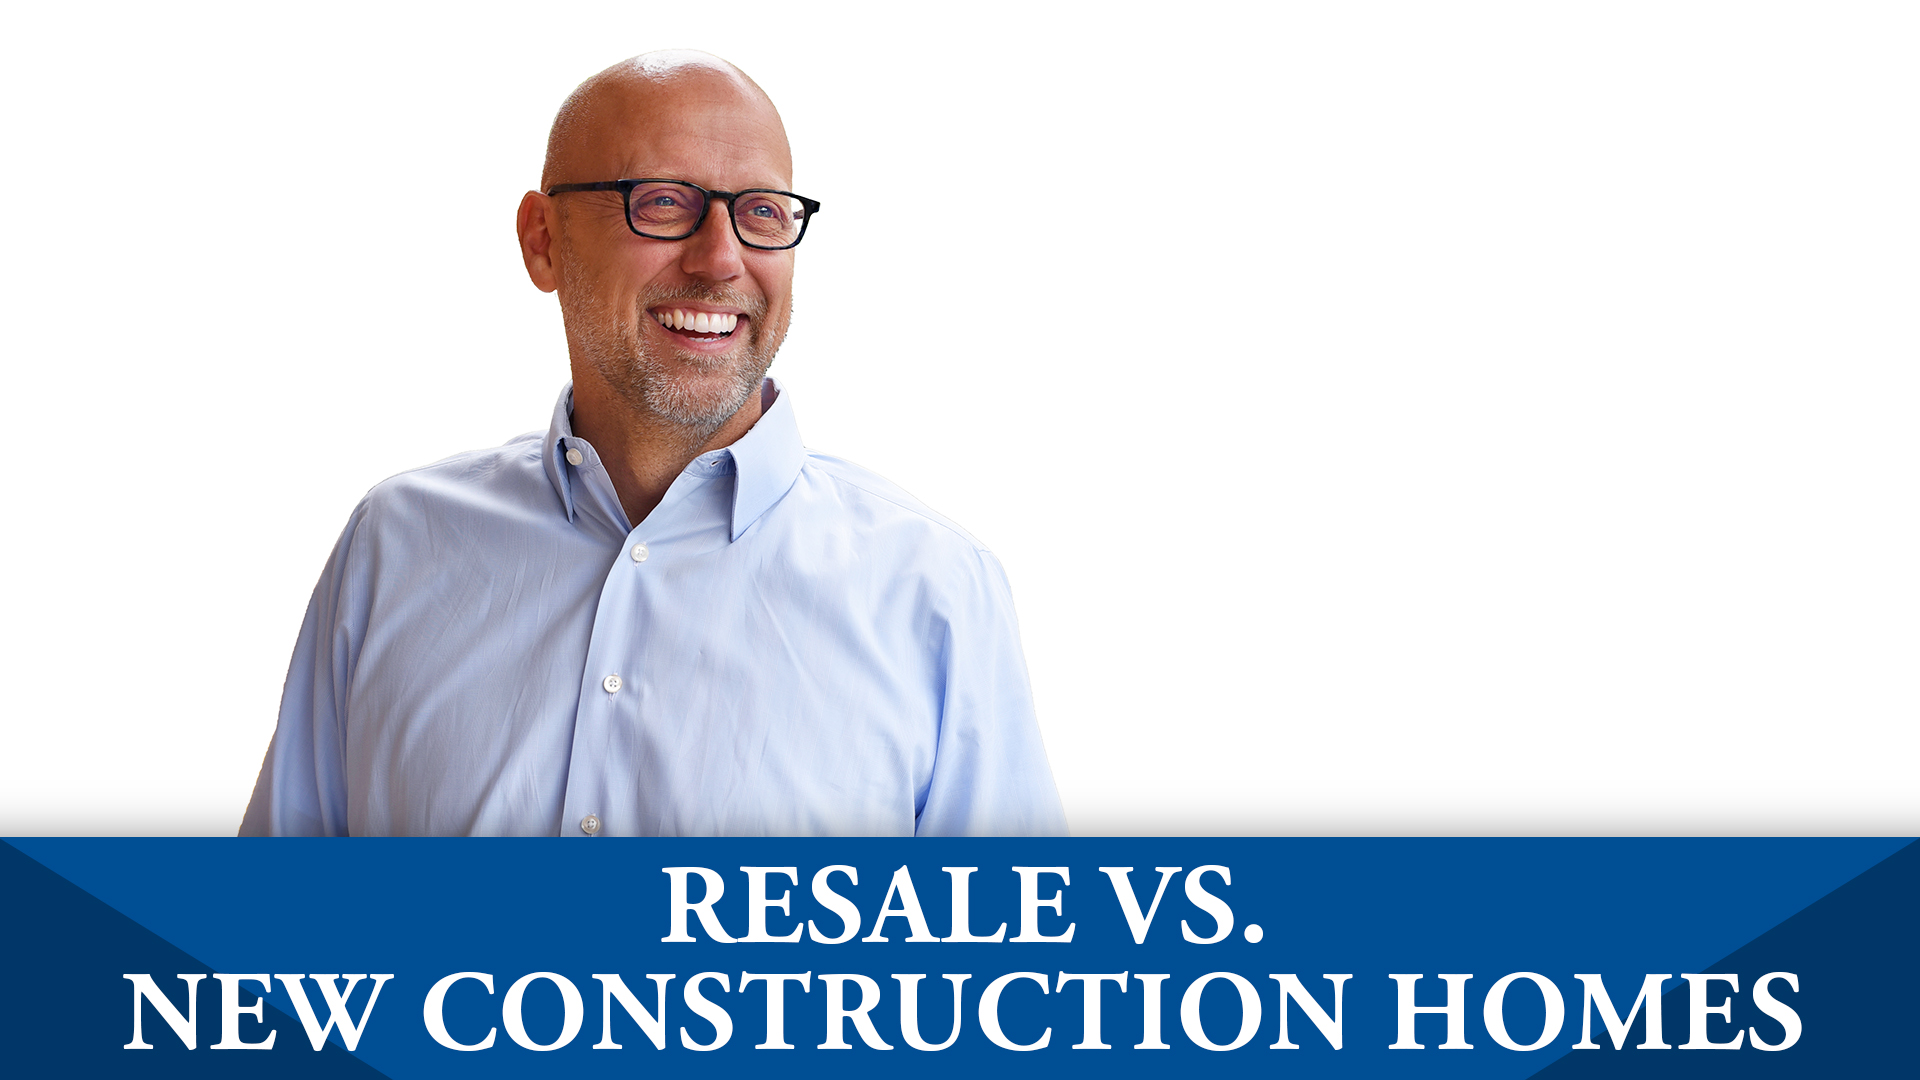 3 Benefits of Resale and New Construction Homes